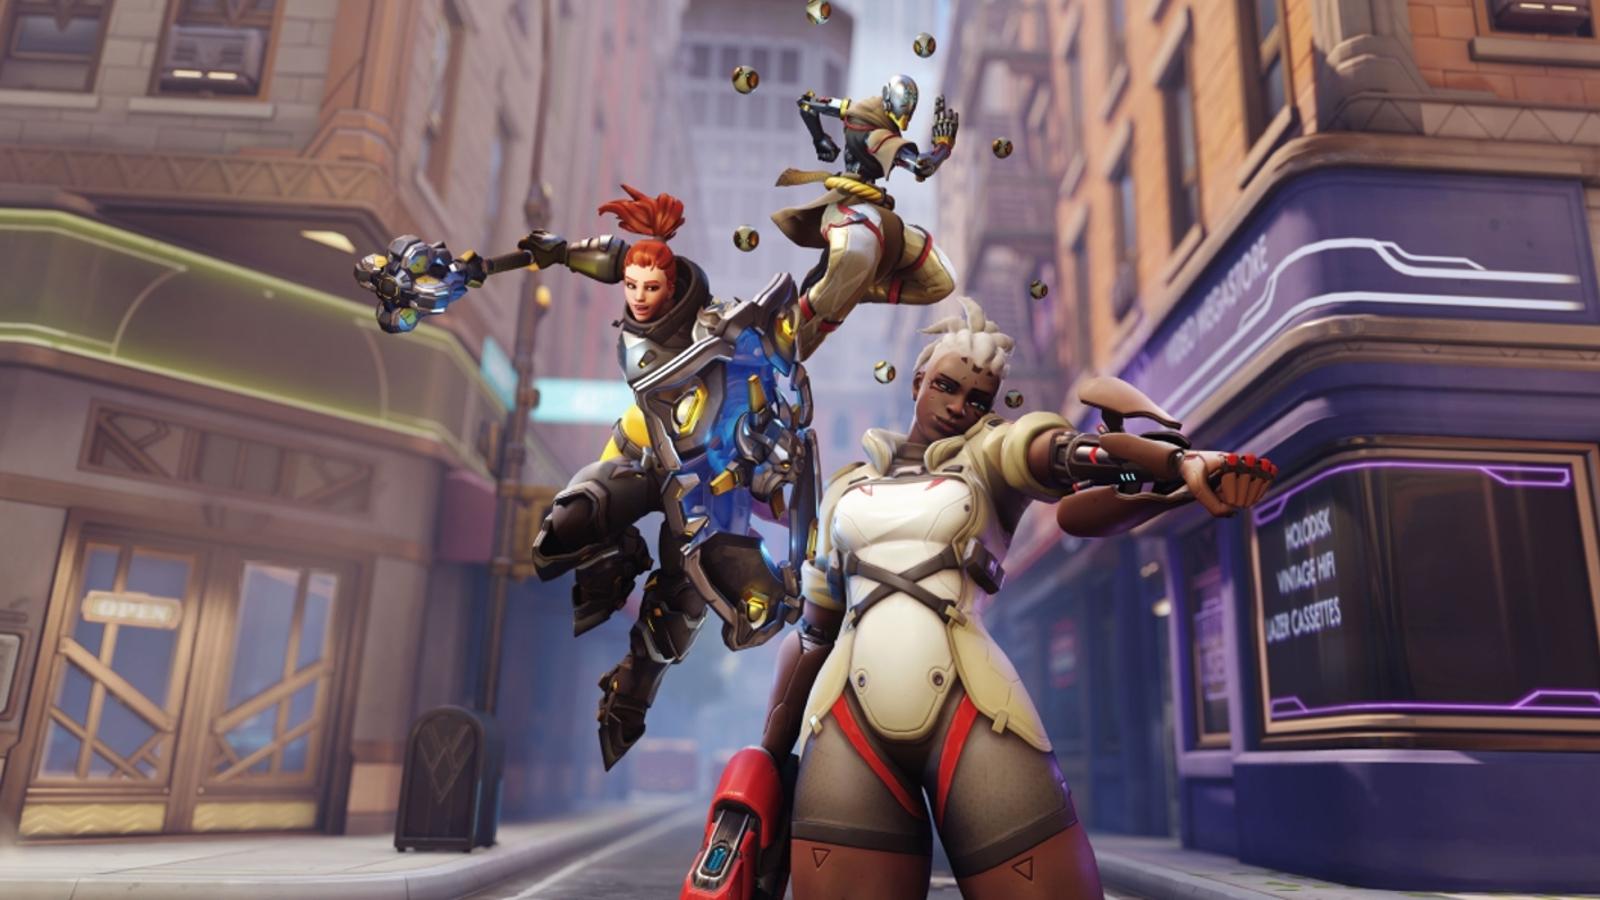 Overwatch 2's Heroes are the focus of the game and Credits unlock skins to keep them looking good.